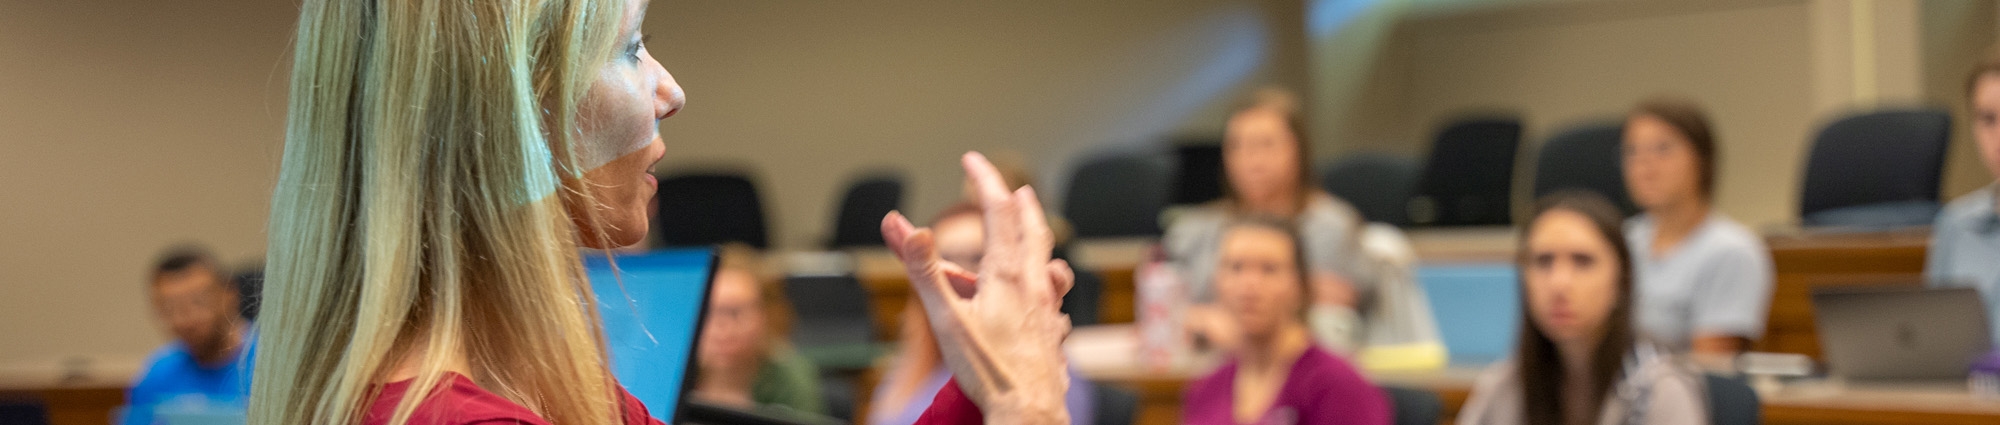 A professor speaks to a class, gesturing with both hands as students in the background look on